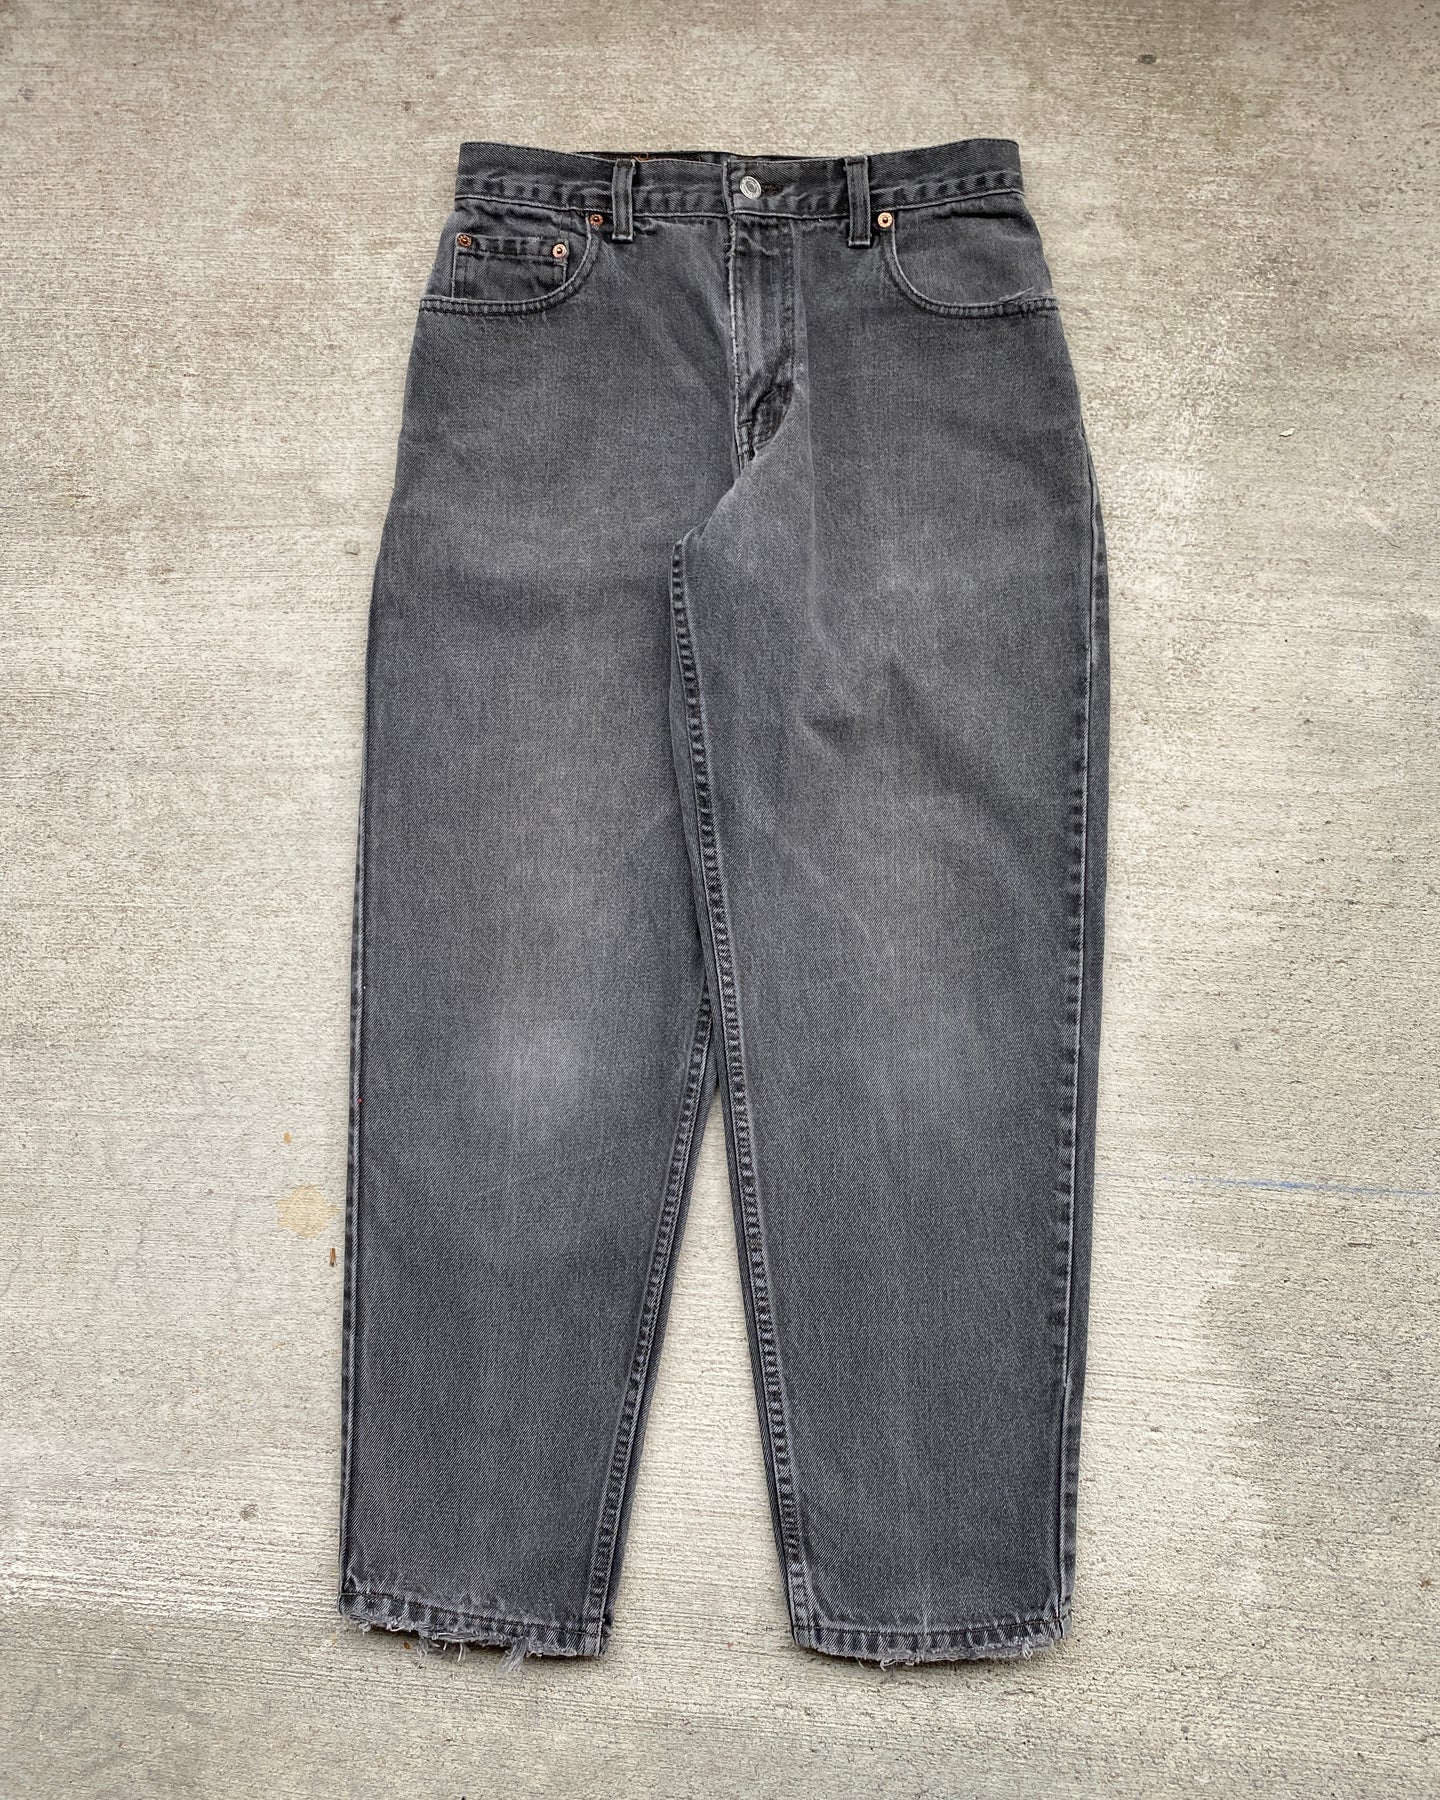 1990s Levi's Charcoal Grey 560 - Size 30 x 29